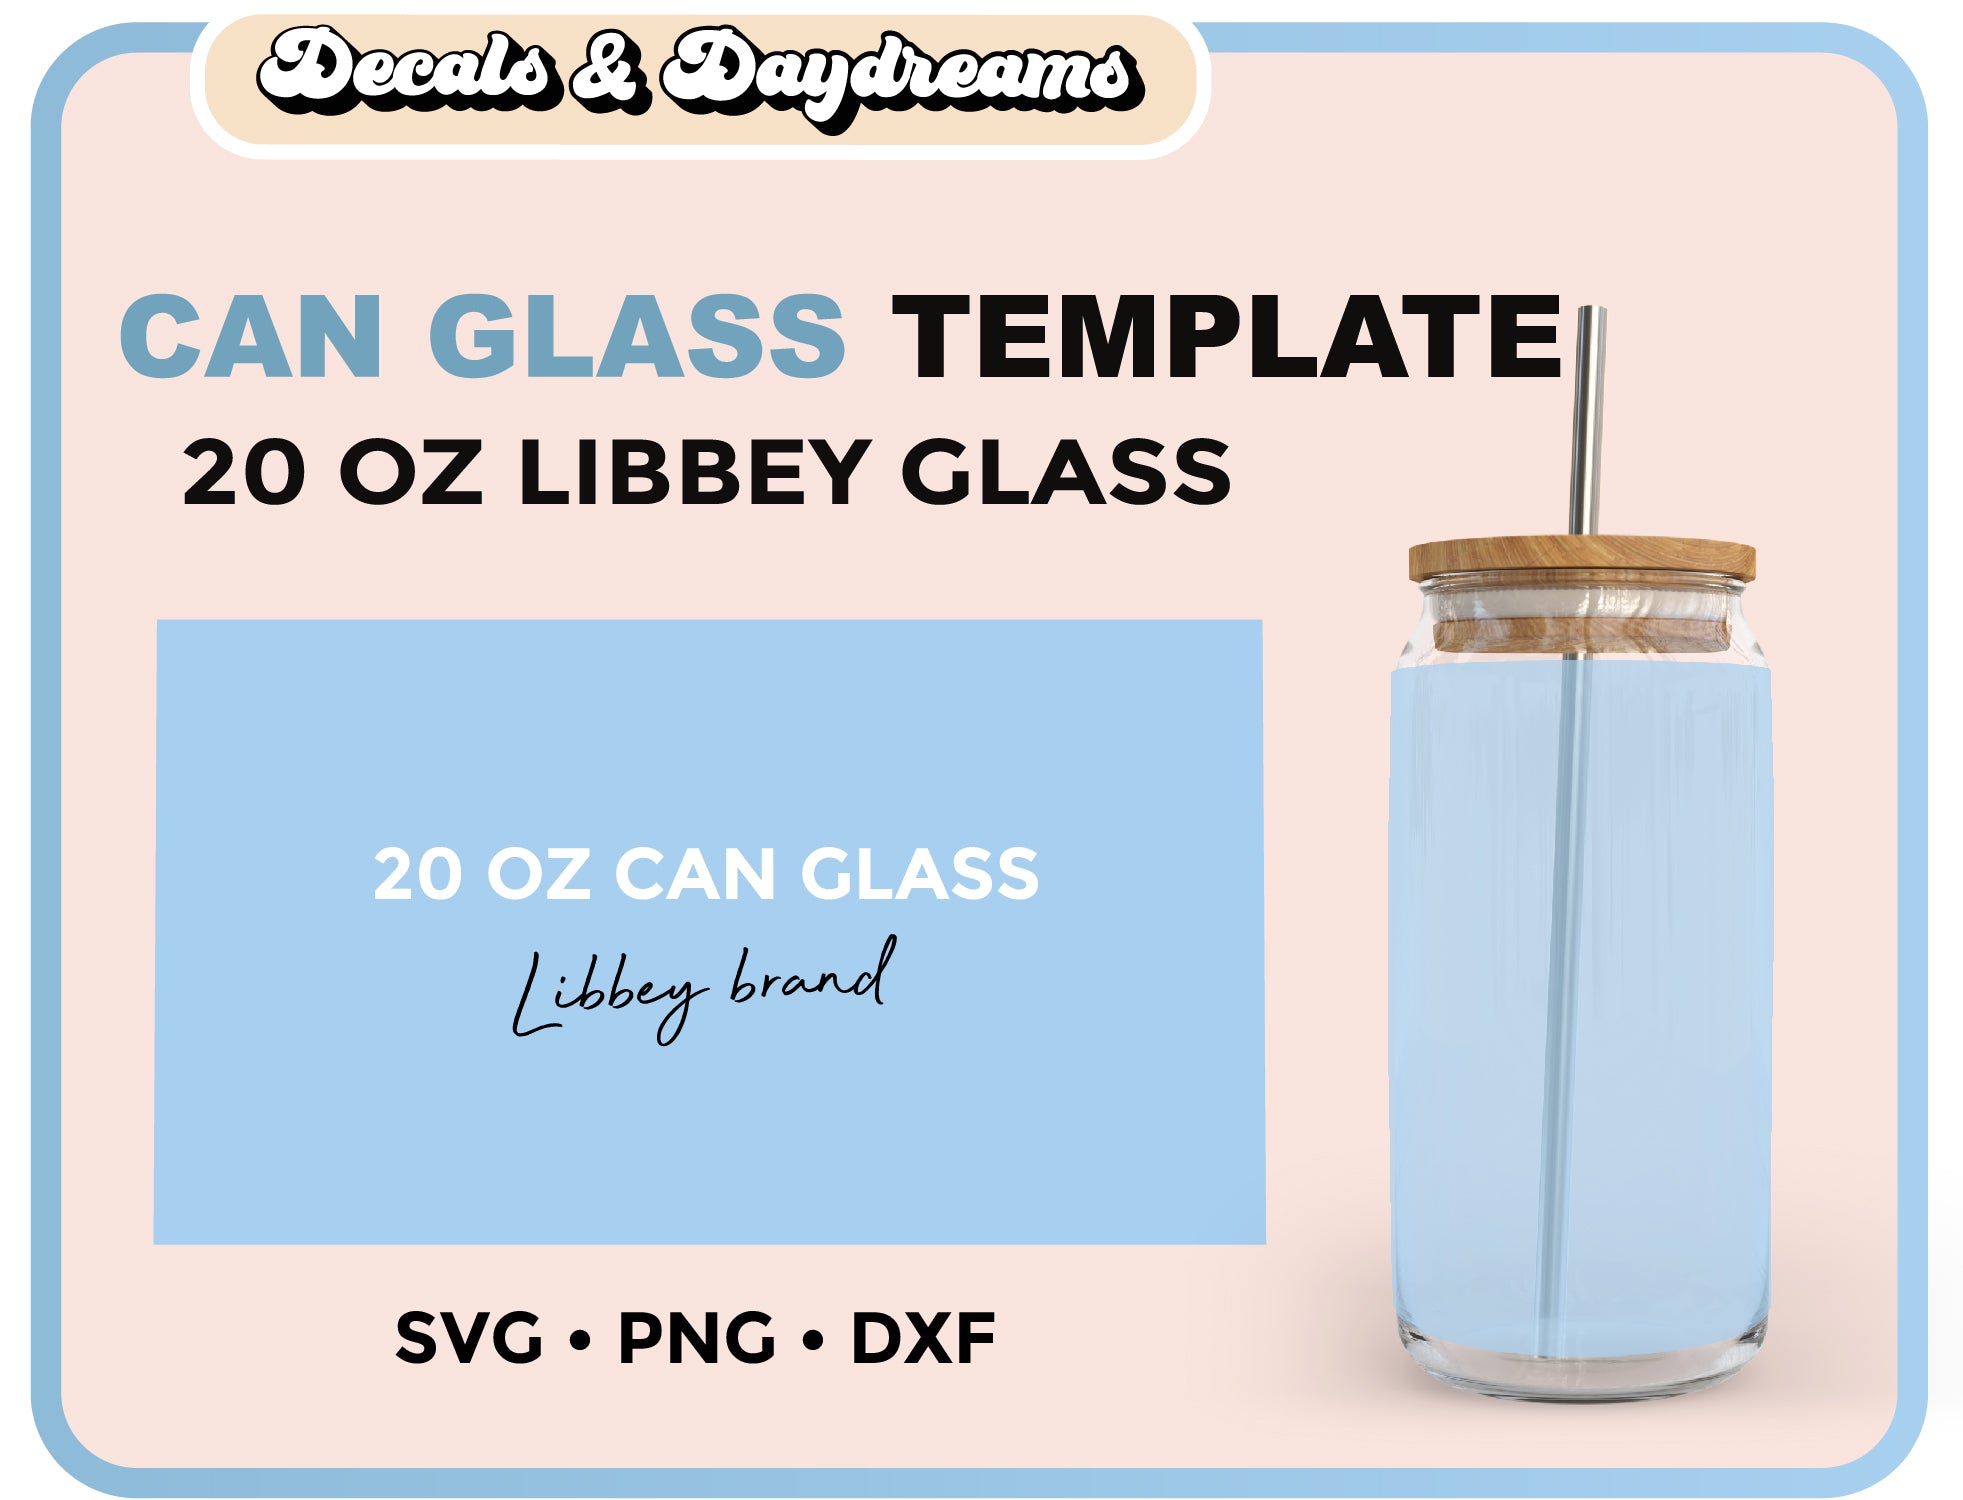 Libbey 20oz Can Glass Template – Decals And Daydreams